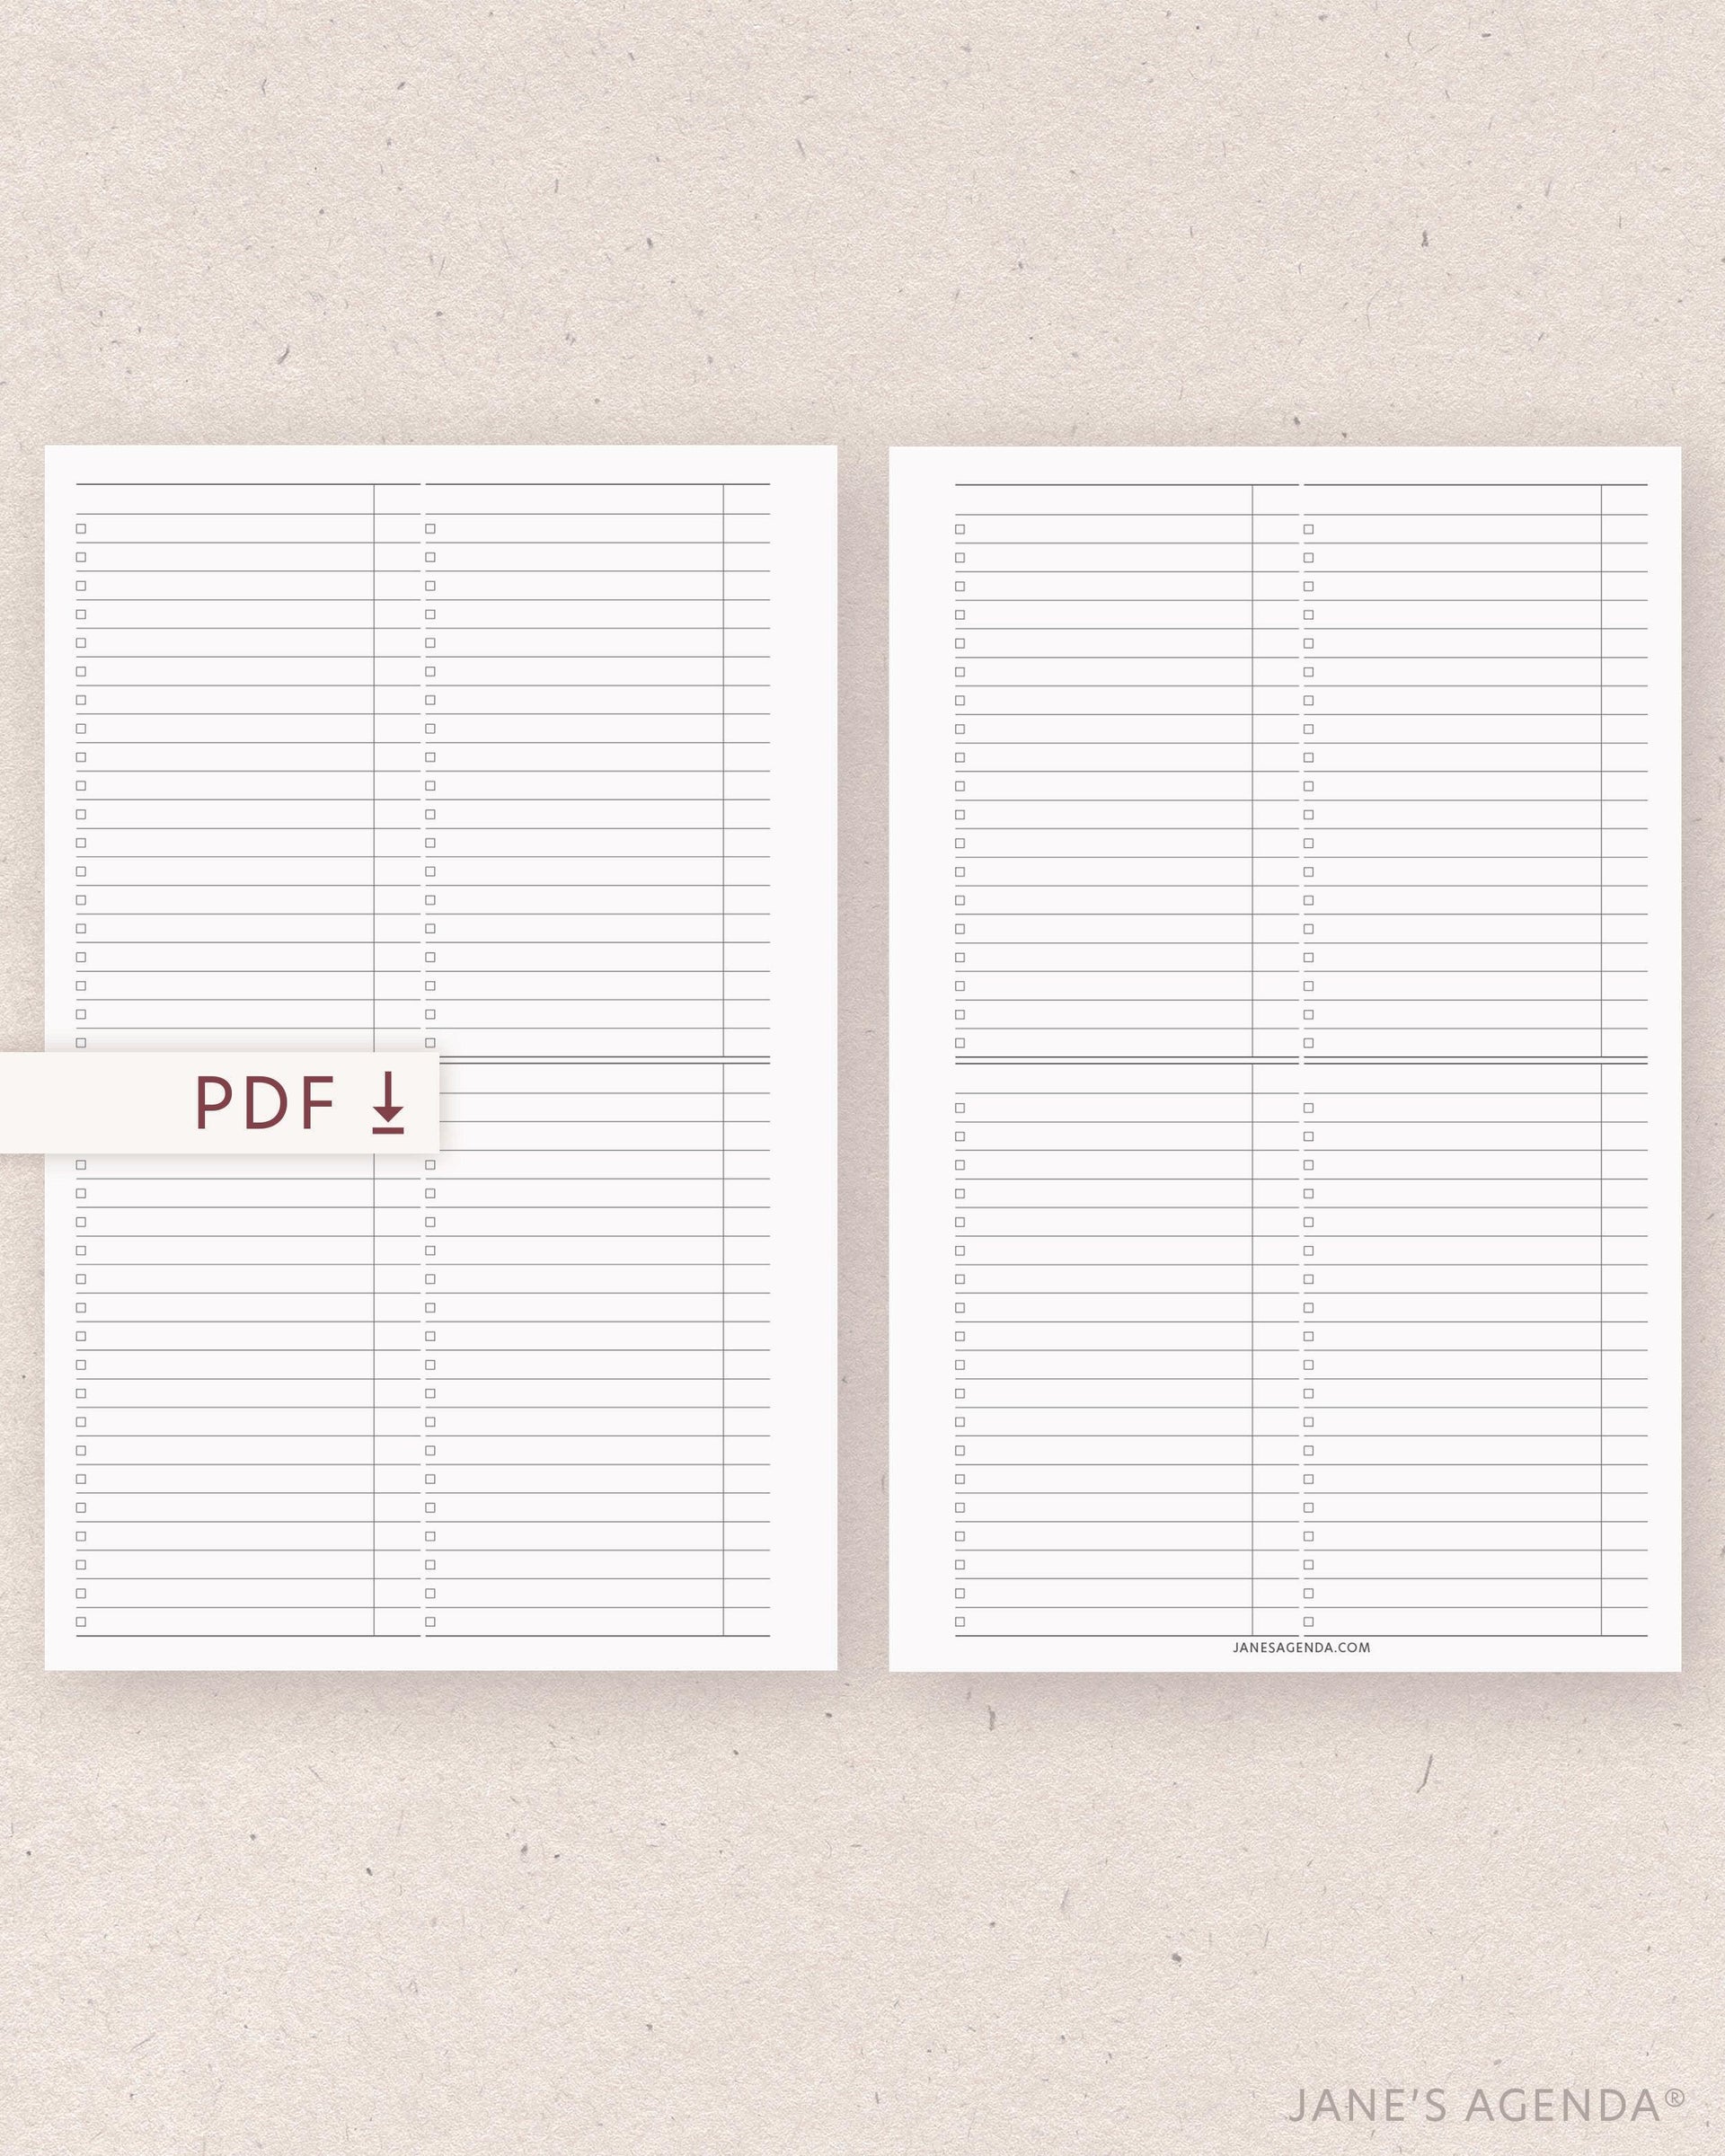 Printable planner inserts by Jane's Agenda for disbound and six ring planners and planner binder systems.